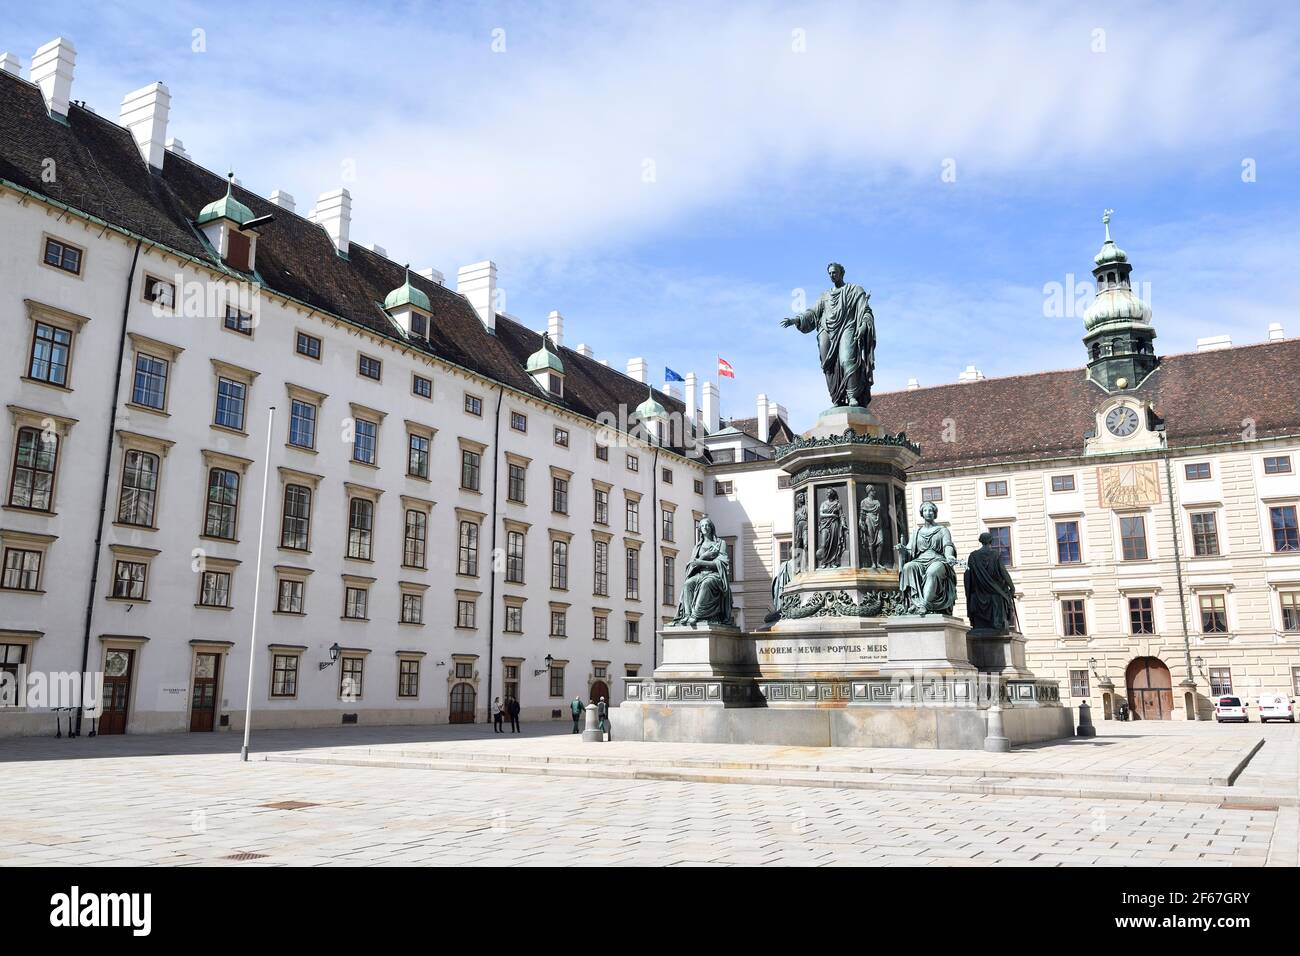 Vienna, Austria. In the castle (Hofburg) with the monumental monument to Emperor Franz I in the center Stock Photo